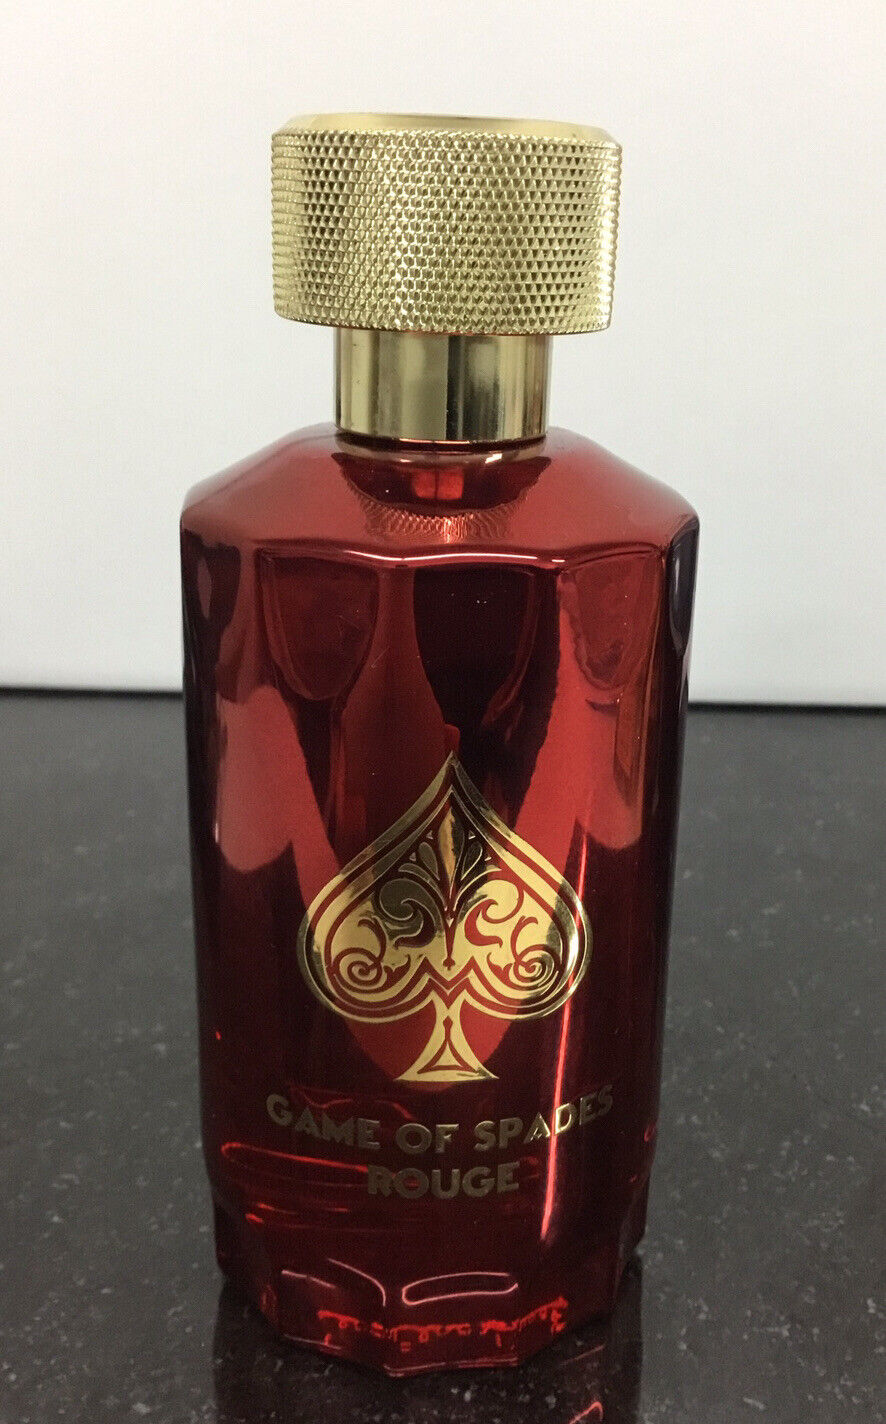 Game of Spade Rouge Extrait by Jo Milano Paris 3.4 oz Parfum Luxury Collection